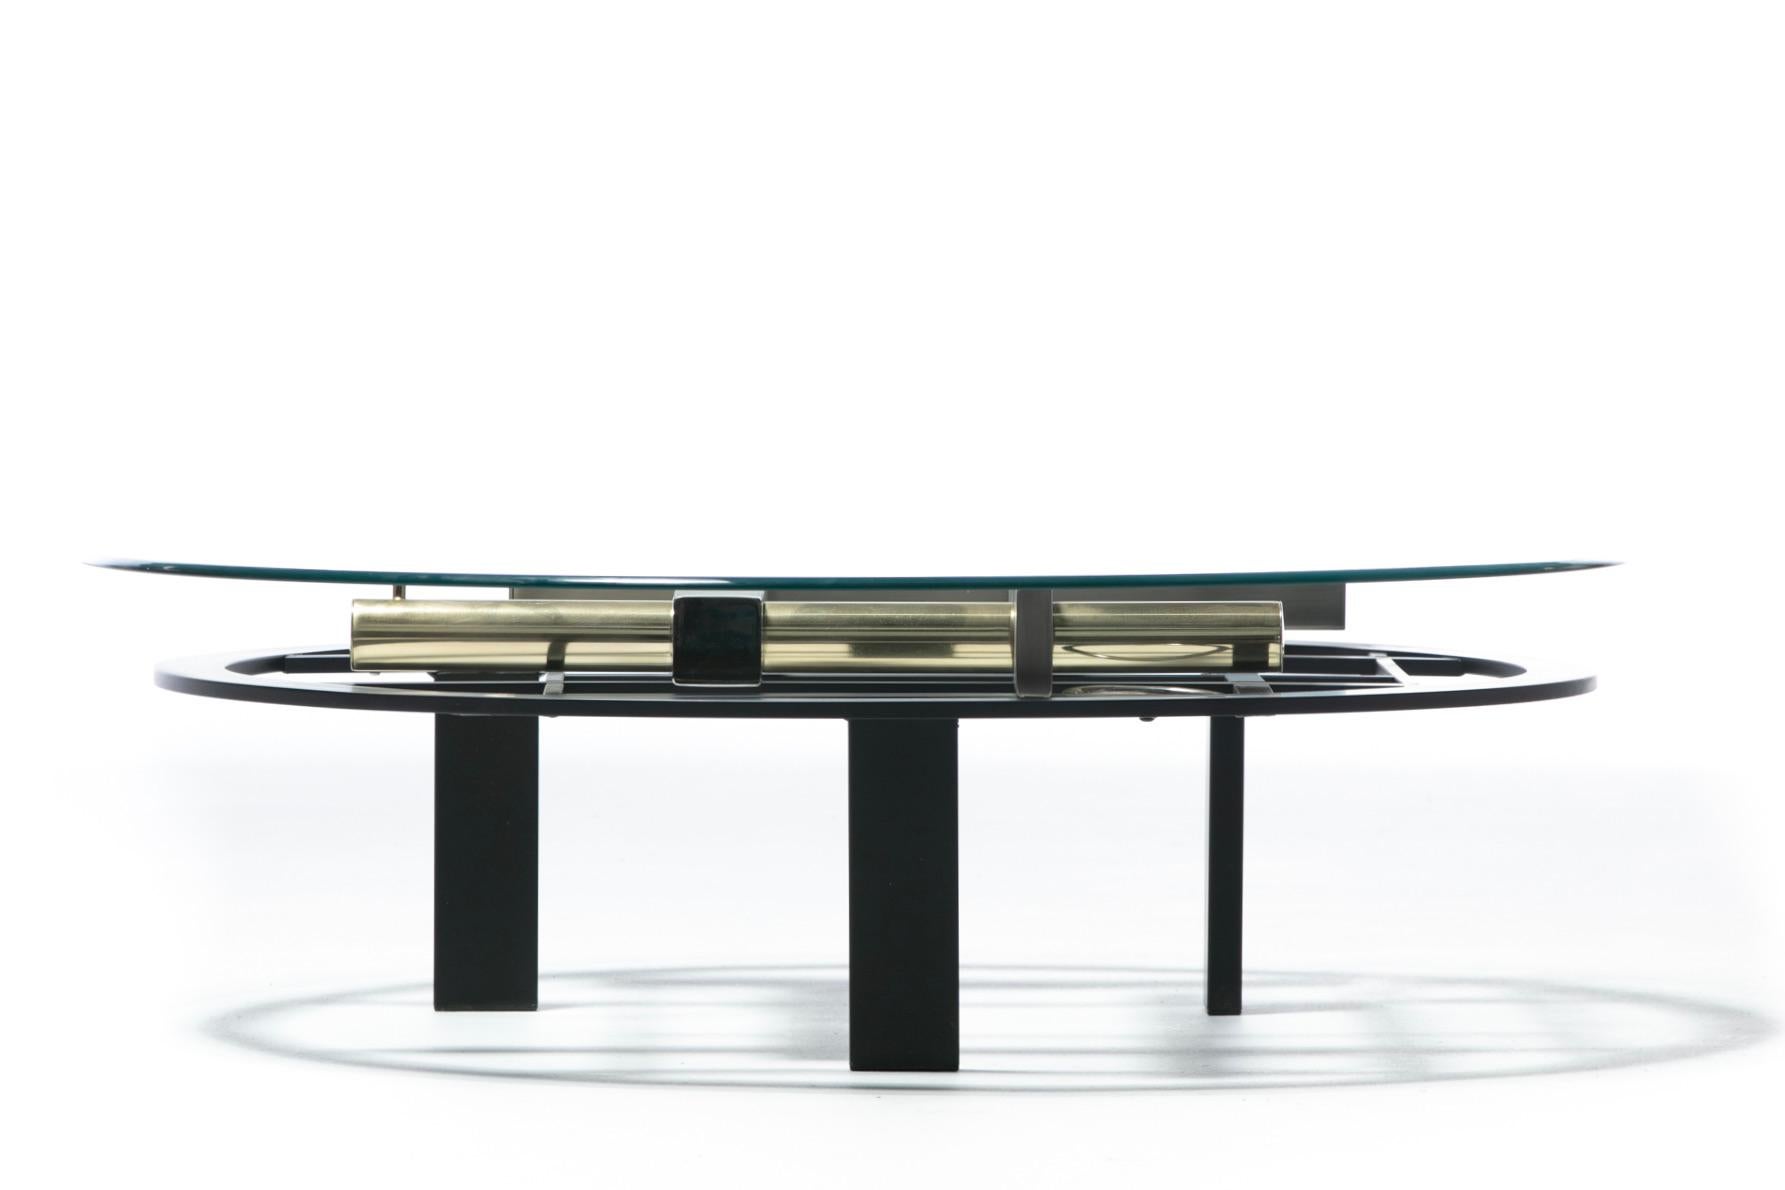 1980s Post modern mixed metal coffee table with geometric forms by designer Kaizo Oto for Design Institute of America. A great way to integrate or bring together mixed metals into your space, this Kaizo Oto coffee table features quite a bit of